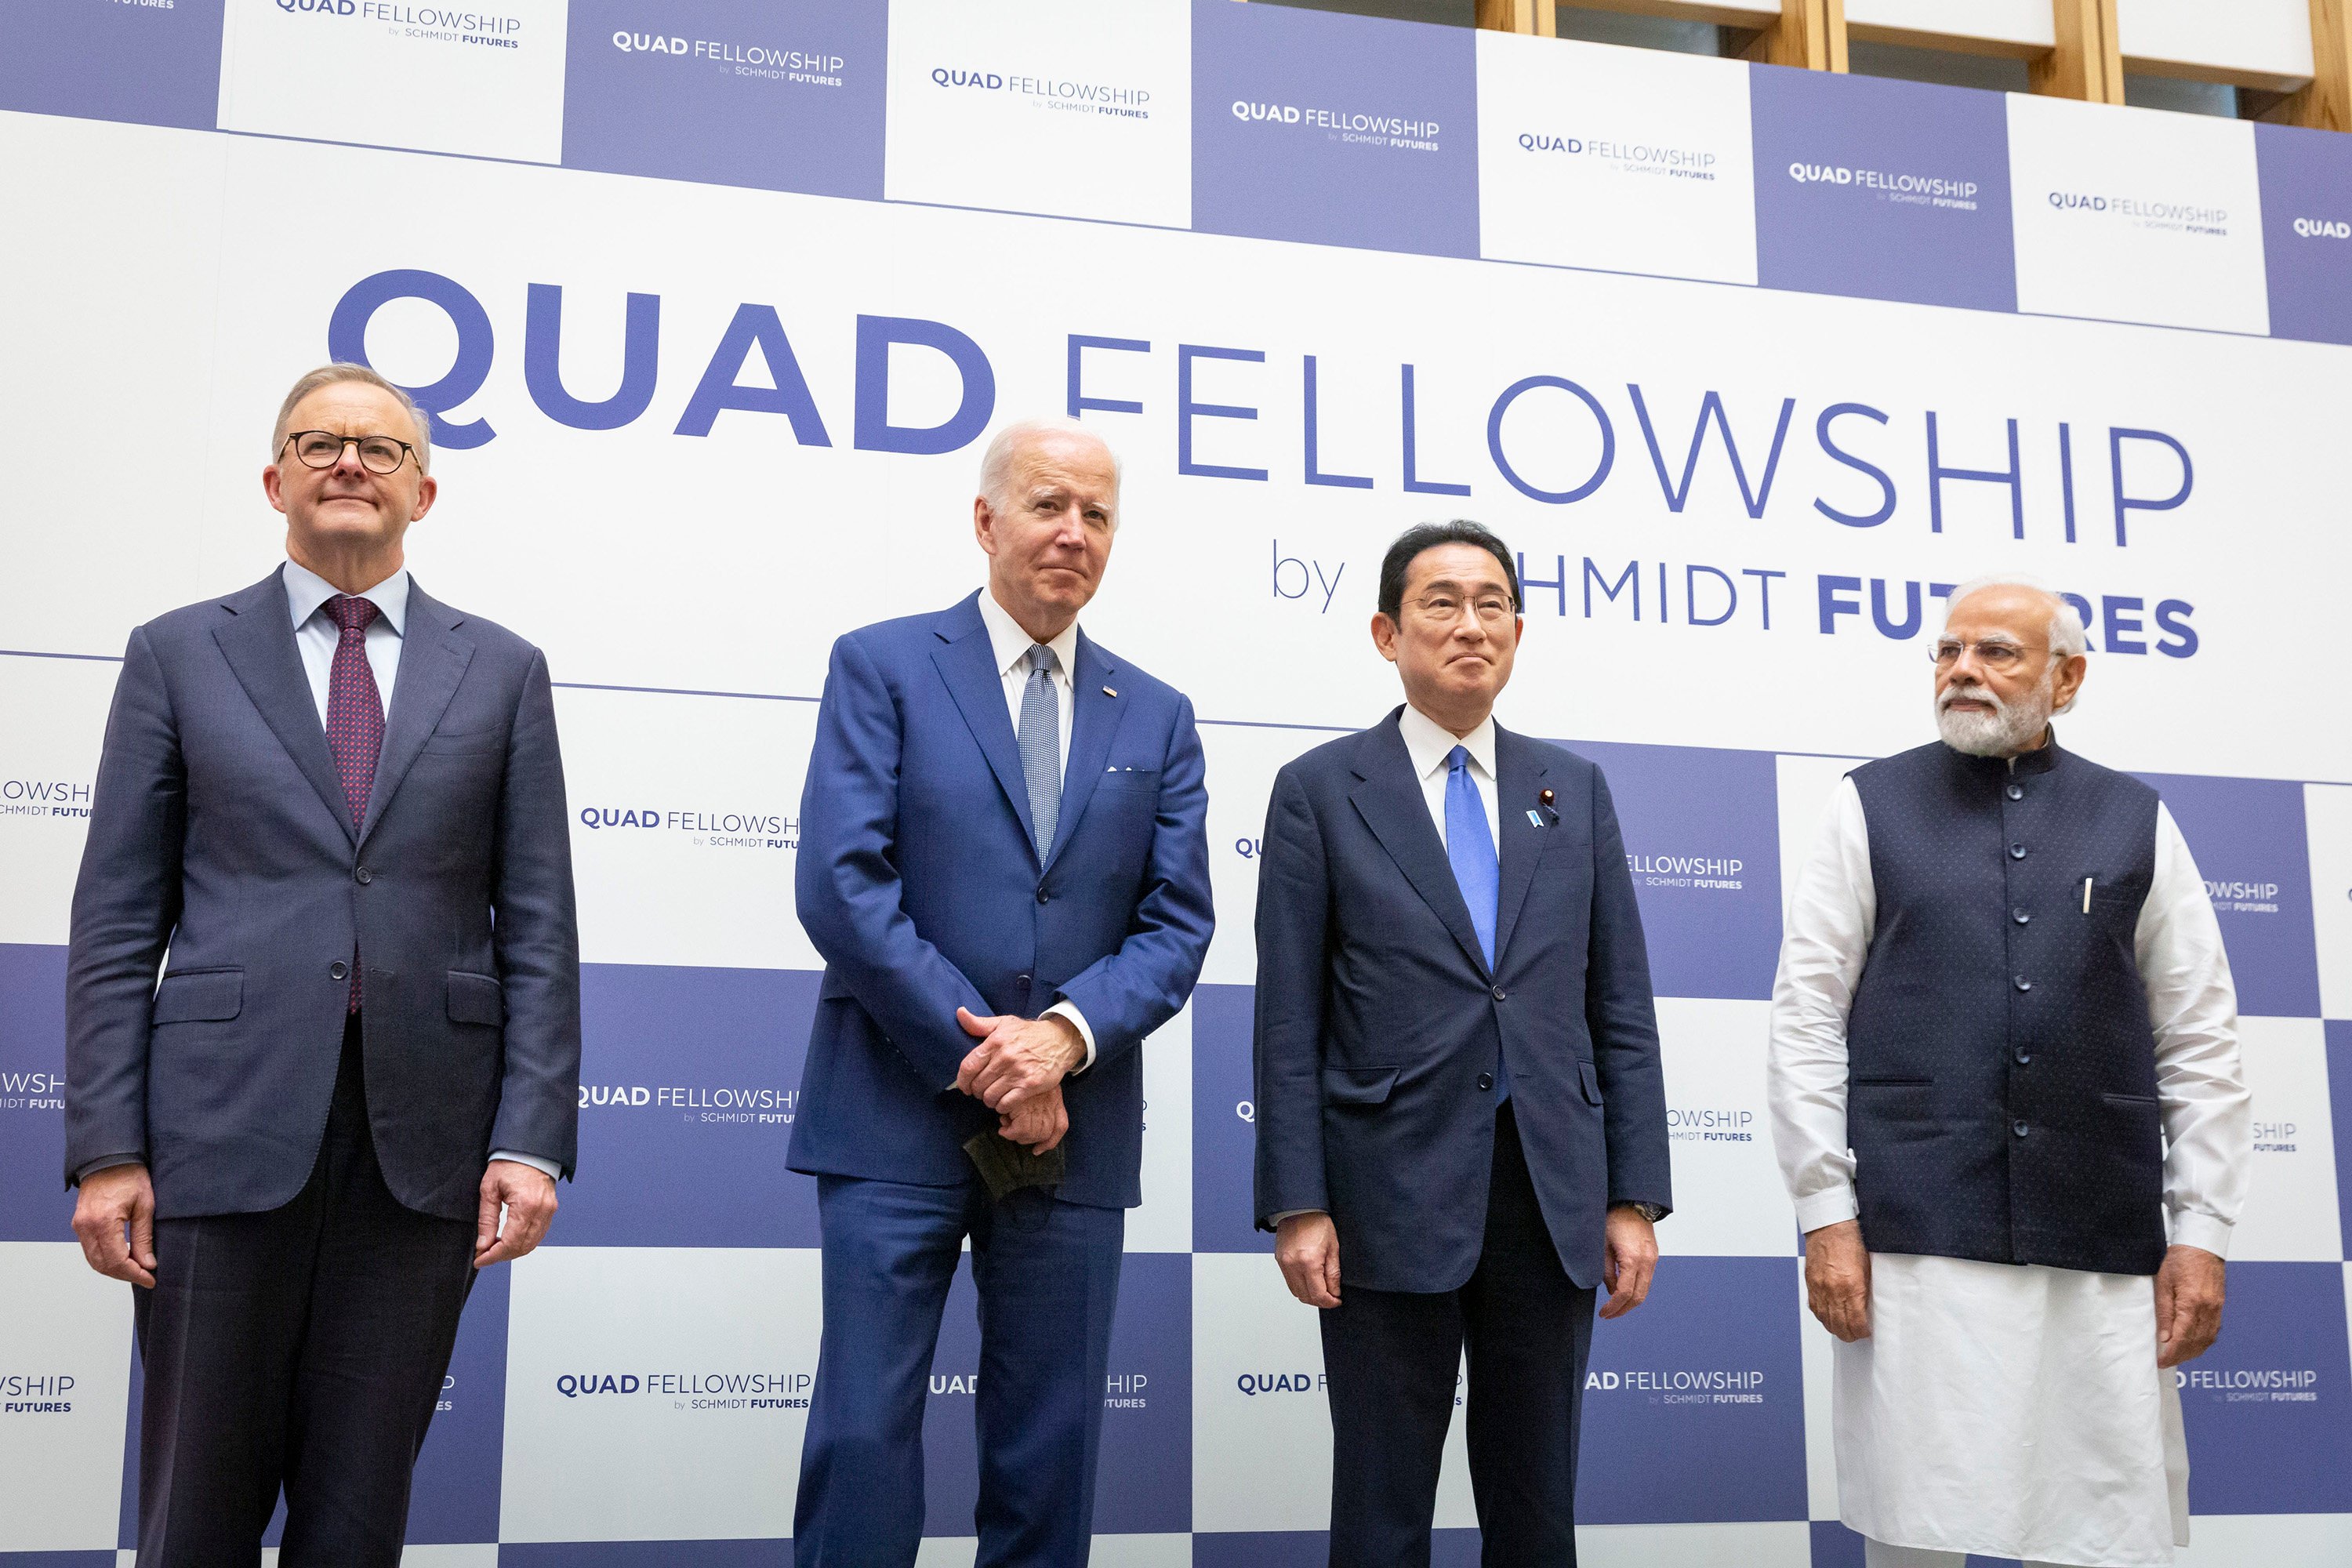 From the left, Australian Prime Minister Anthony Albanese, US President Joe Biden, Japanese Prime Minister Fumio Kishida and Indian Prime Minister Narendra Modi attend the Quad Fellowship Founding Celebration event in Tokyo, on May 24, 2022. Photo: Getty Images/TNS